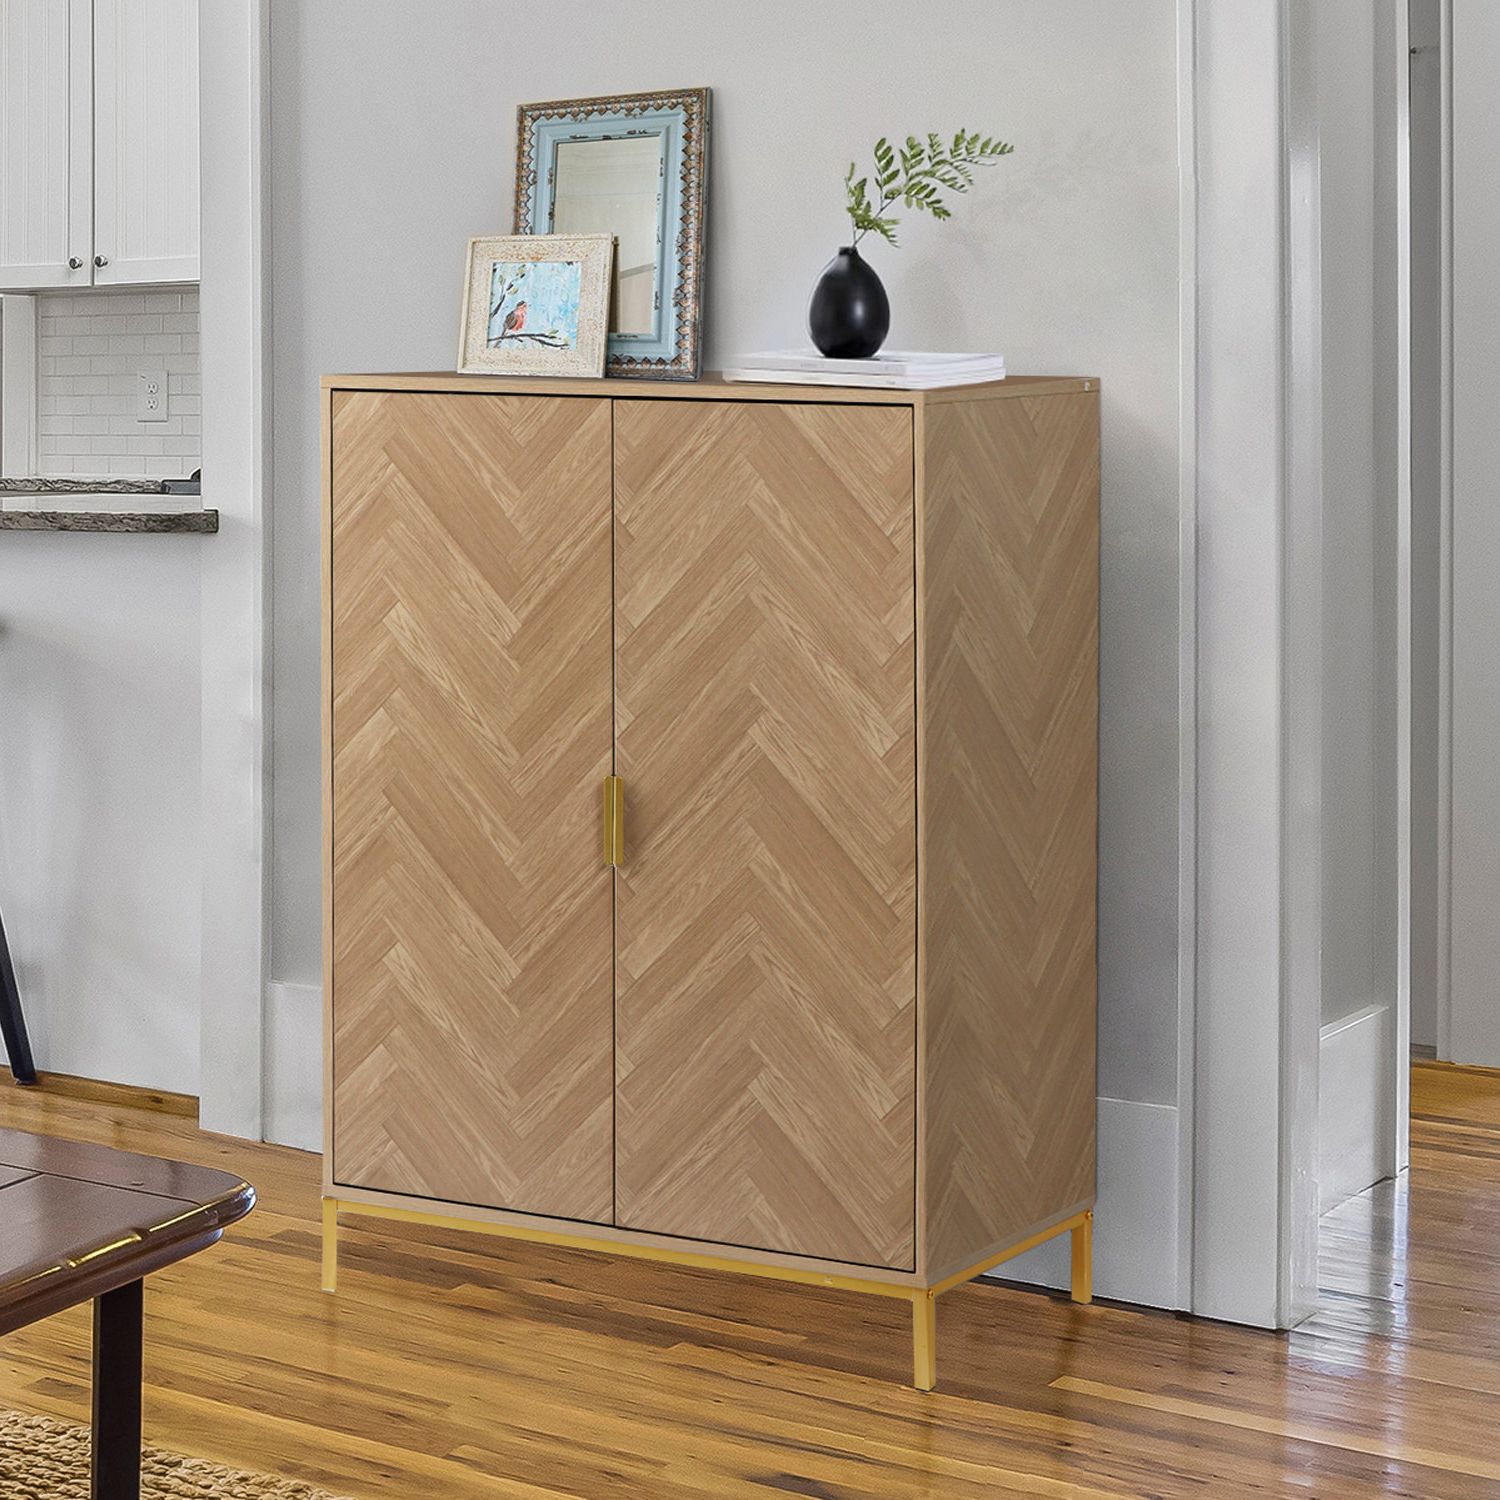 Corrigan Studio® Herringbone Wood Accent Storage Cabinet With 2 Doors,  Natural Oak Tall Sideboard Cupboard With Adjustable Shelves For Living Room  Kitchen Hallway Entryway & Reviews | Wayfair For Sideboards For Entryway (Gallery 19 of 20)